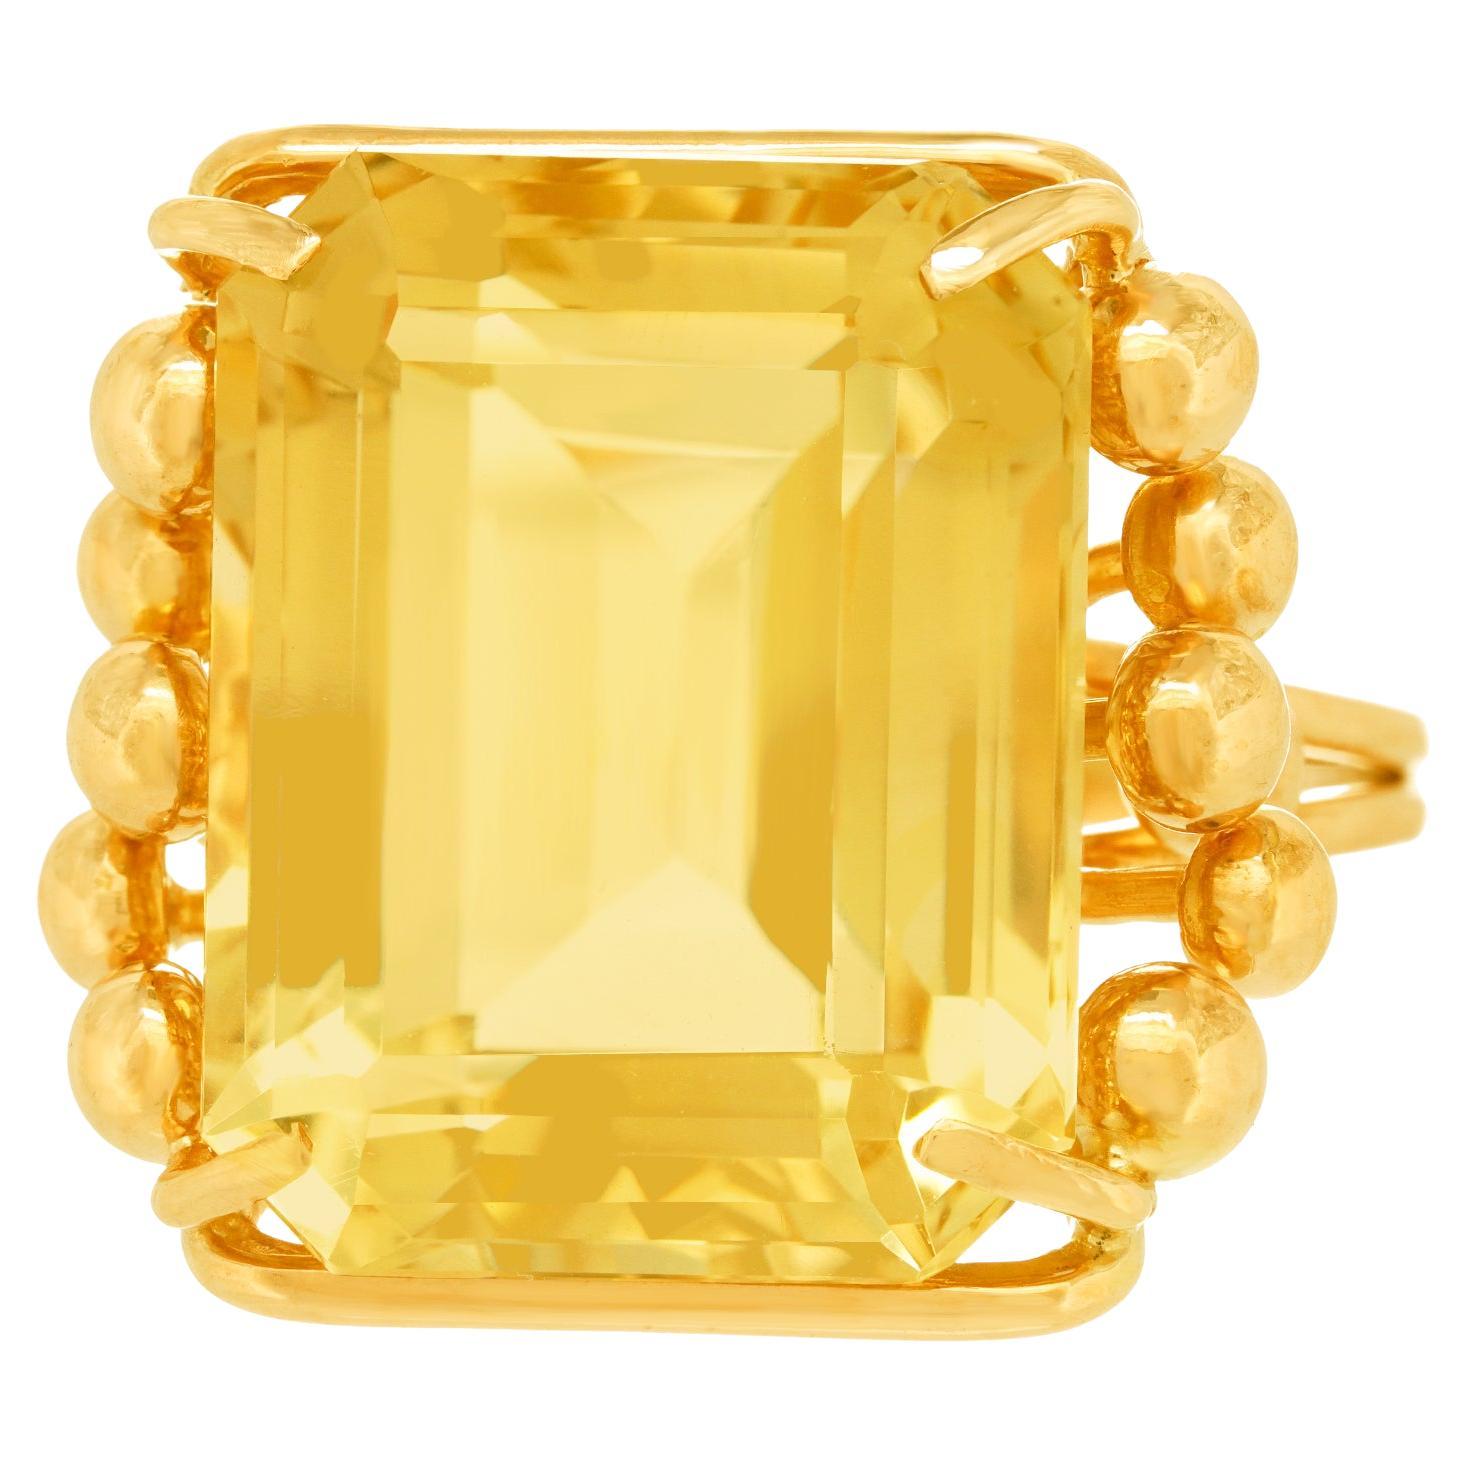  Sixties Pop Art Citrine Ring For Sale